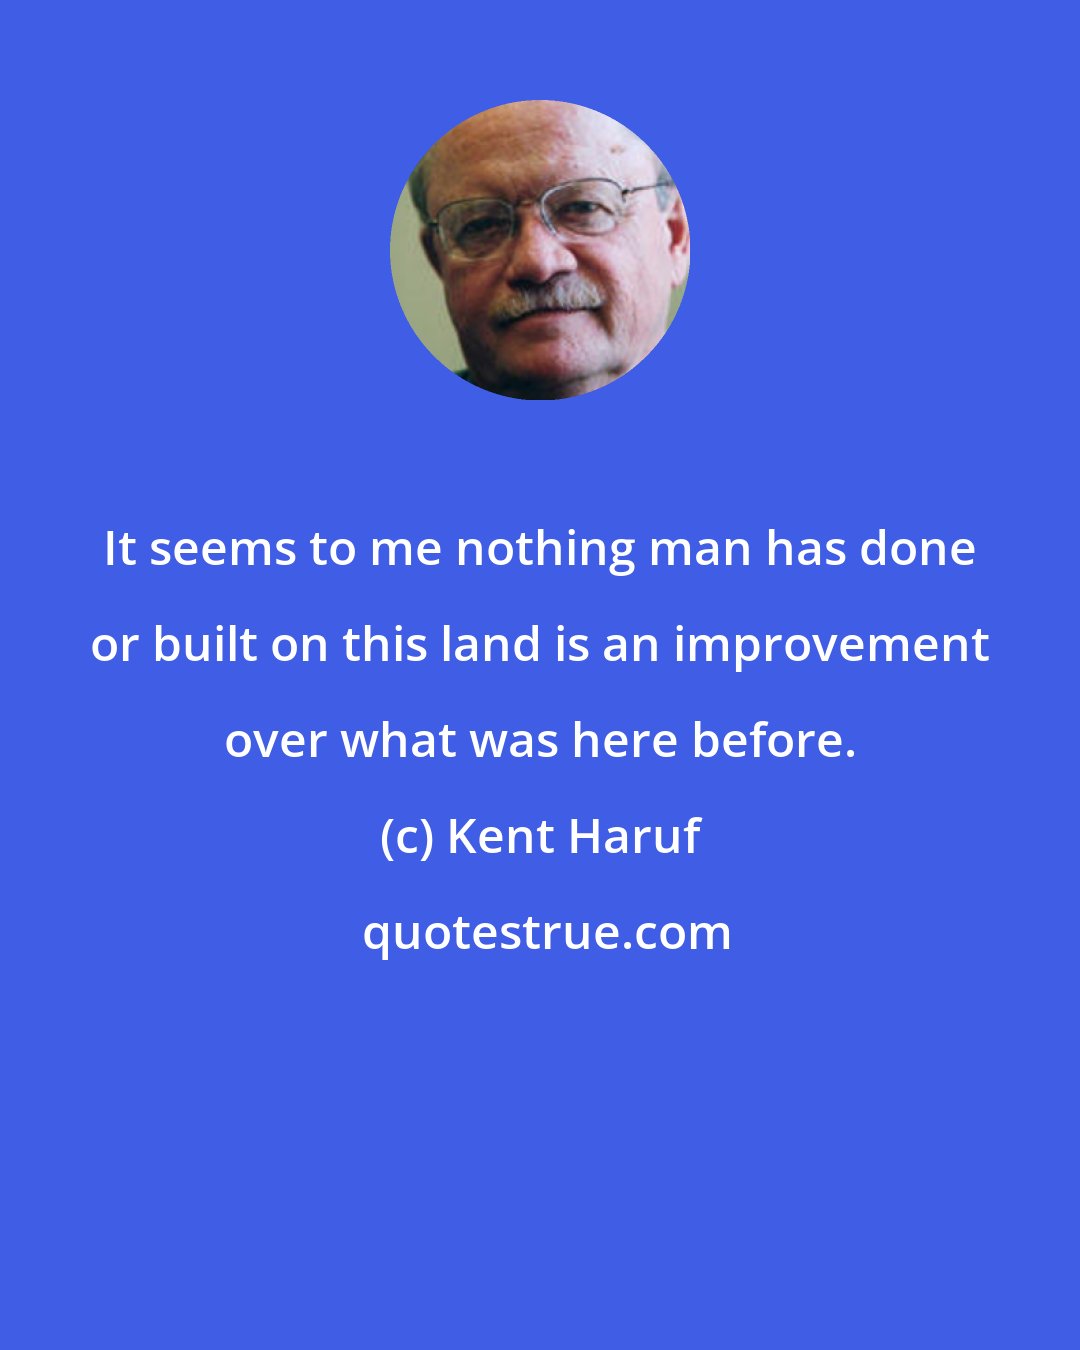 Kent Haruf: It seems to me nothing man has done or built on this land is an improvement over what was here before.